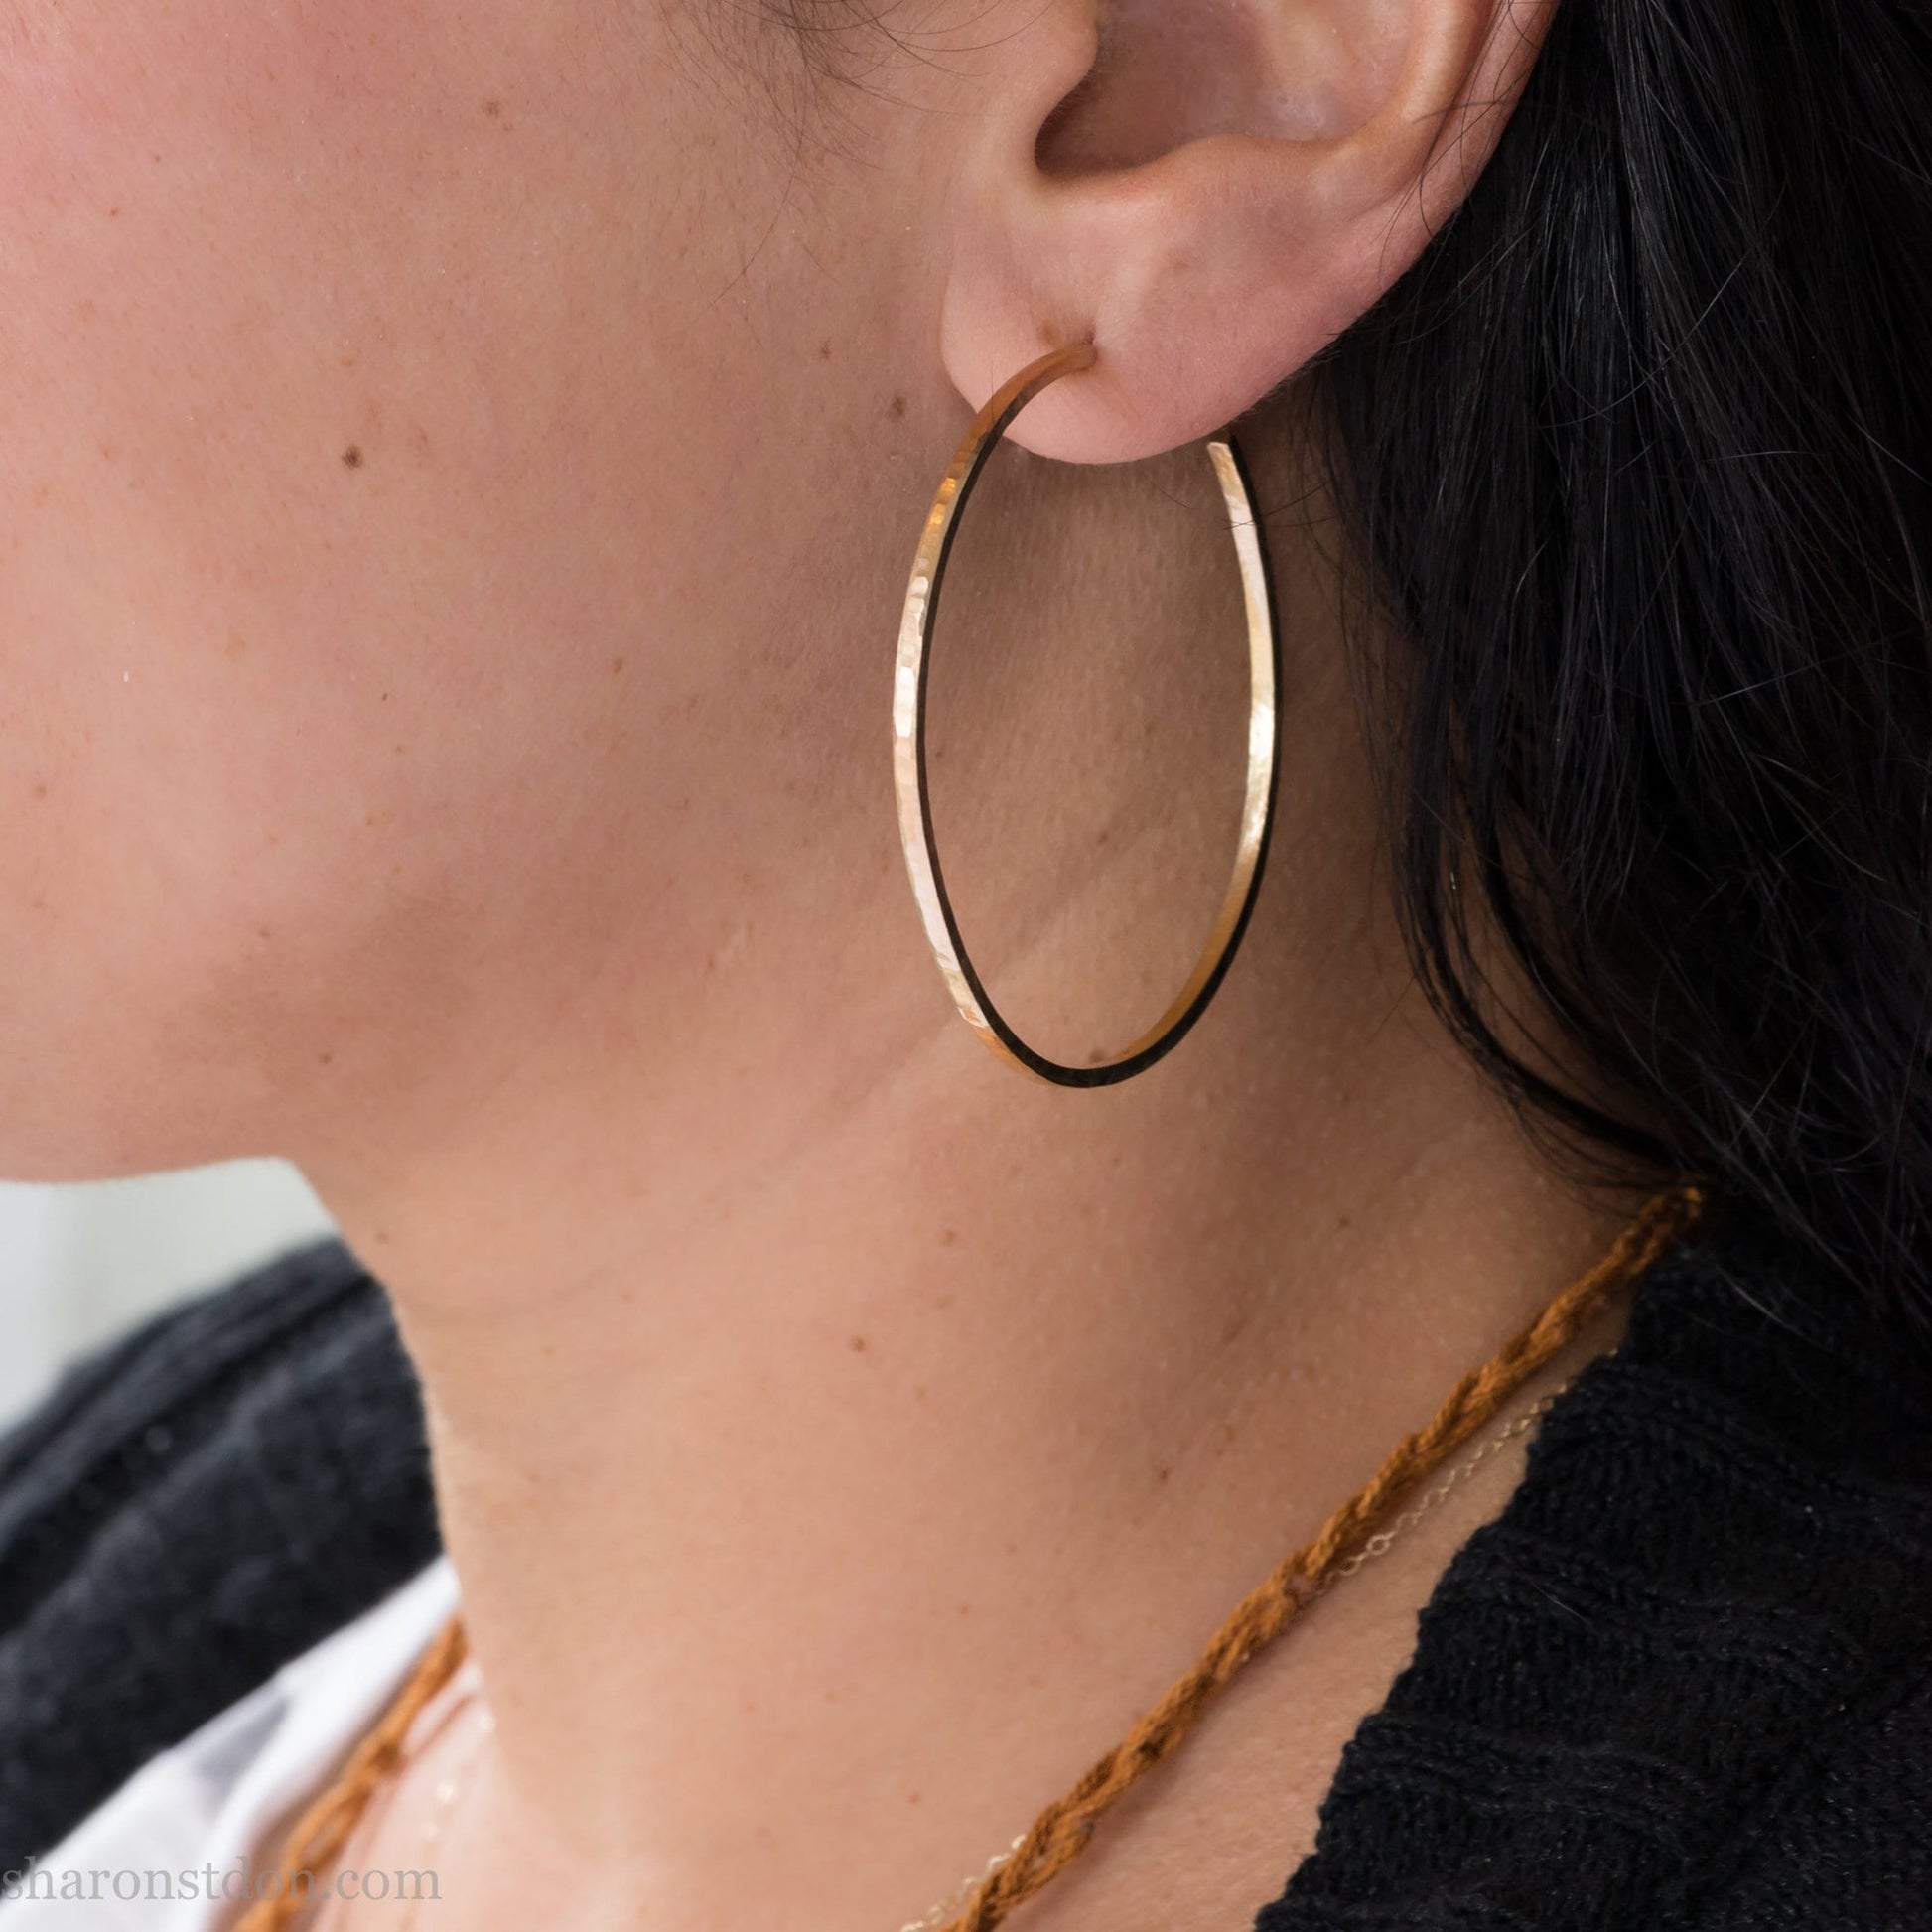 14k yellow gold hoop earrings 50mm diameter, 2mm wide, 1.5mm thick.  High quality, handmade with hammered texture.